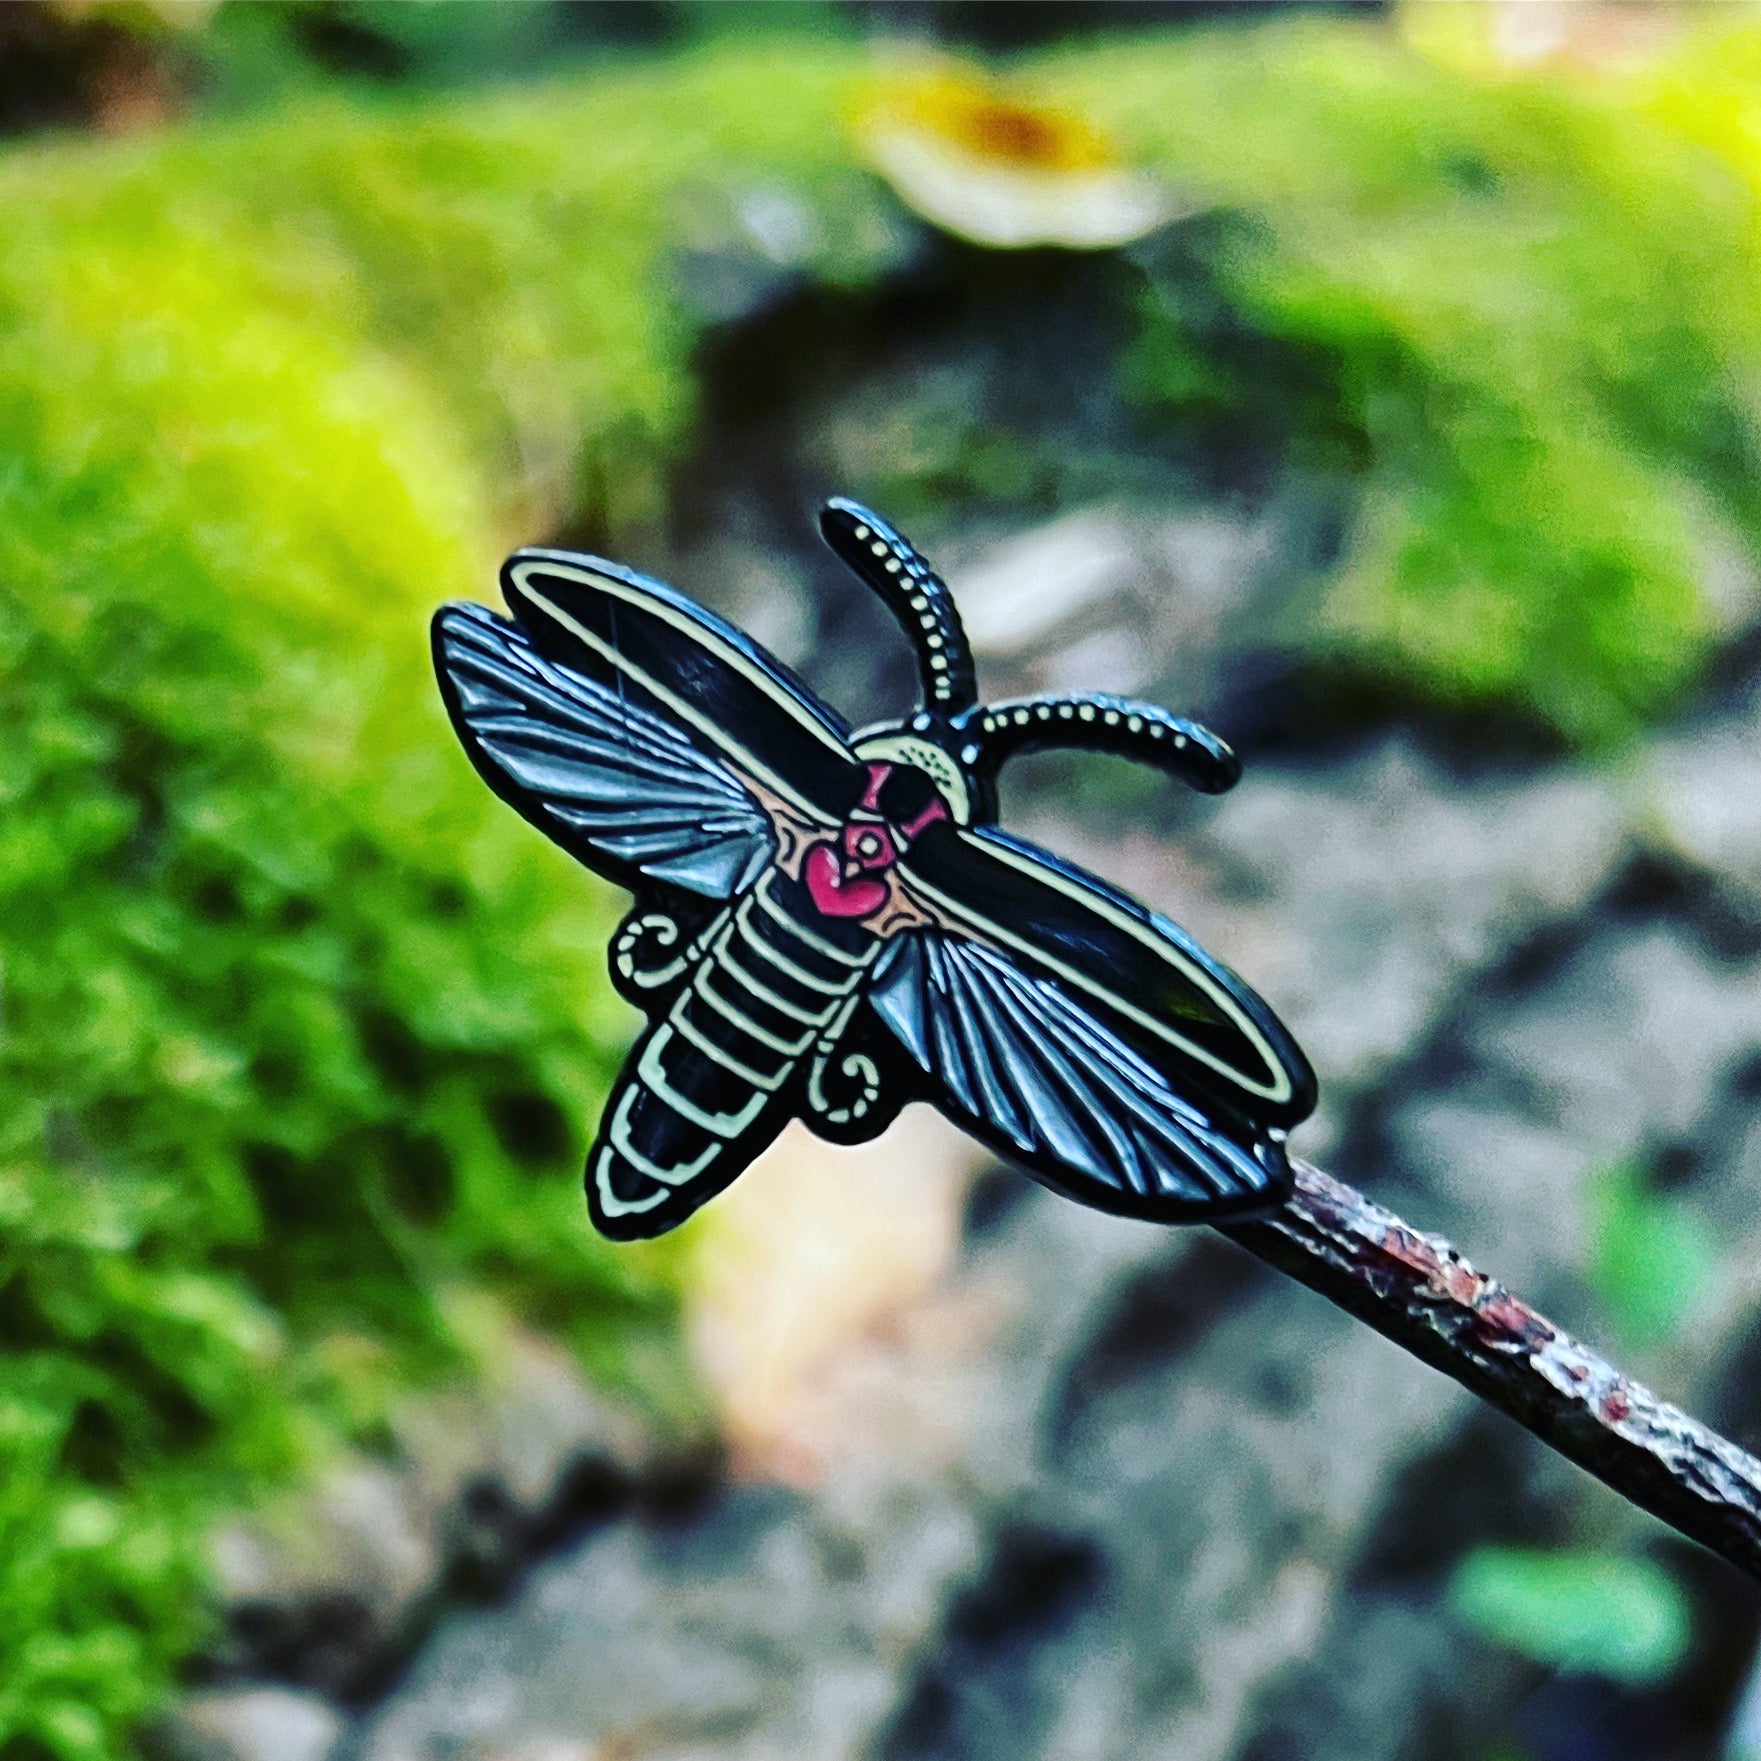 An enamel pin of a big dipper firefly with wings outstretched.